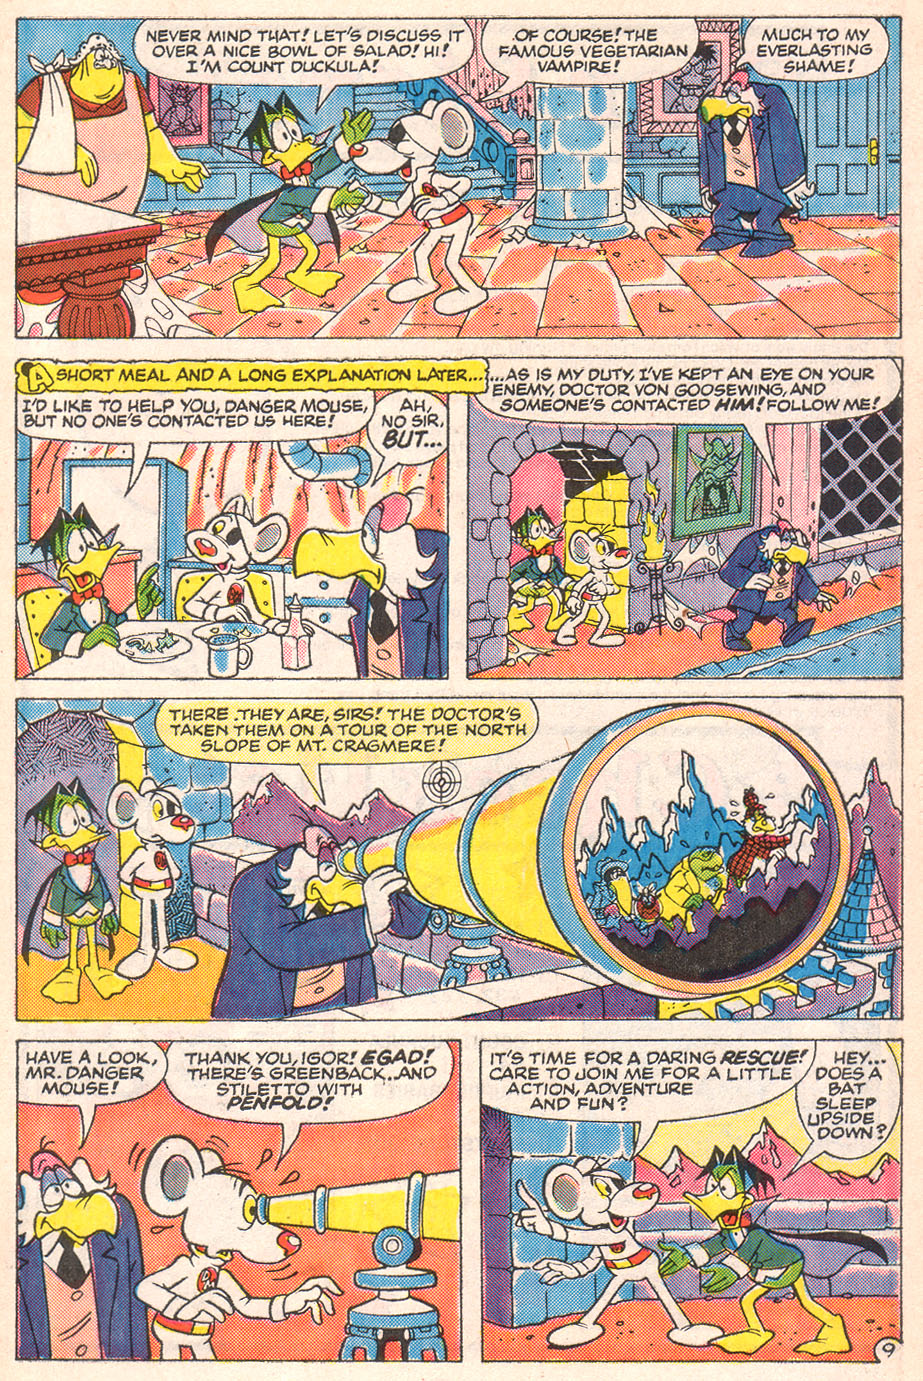 Read online Count Duckula comic -  Issue #4 - 29